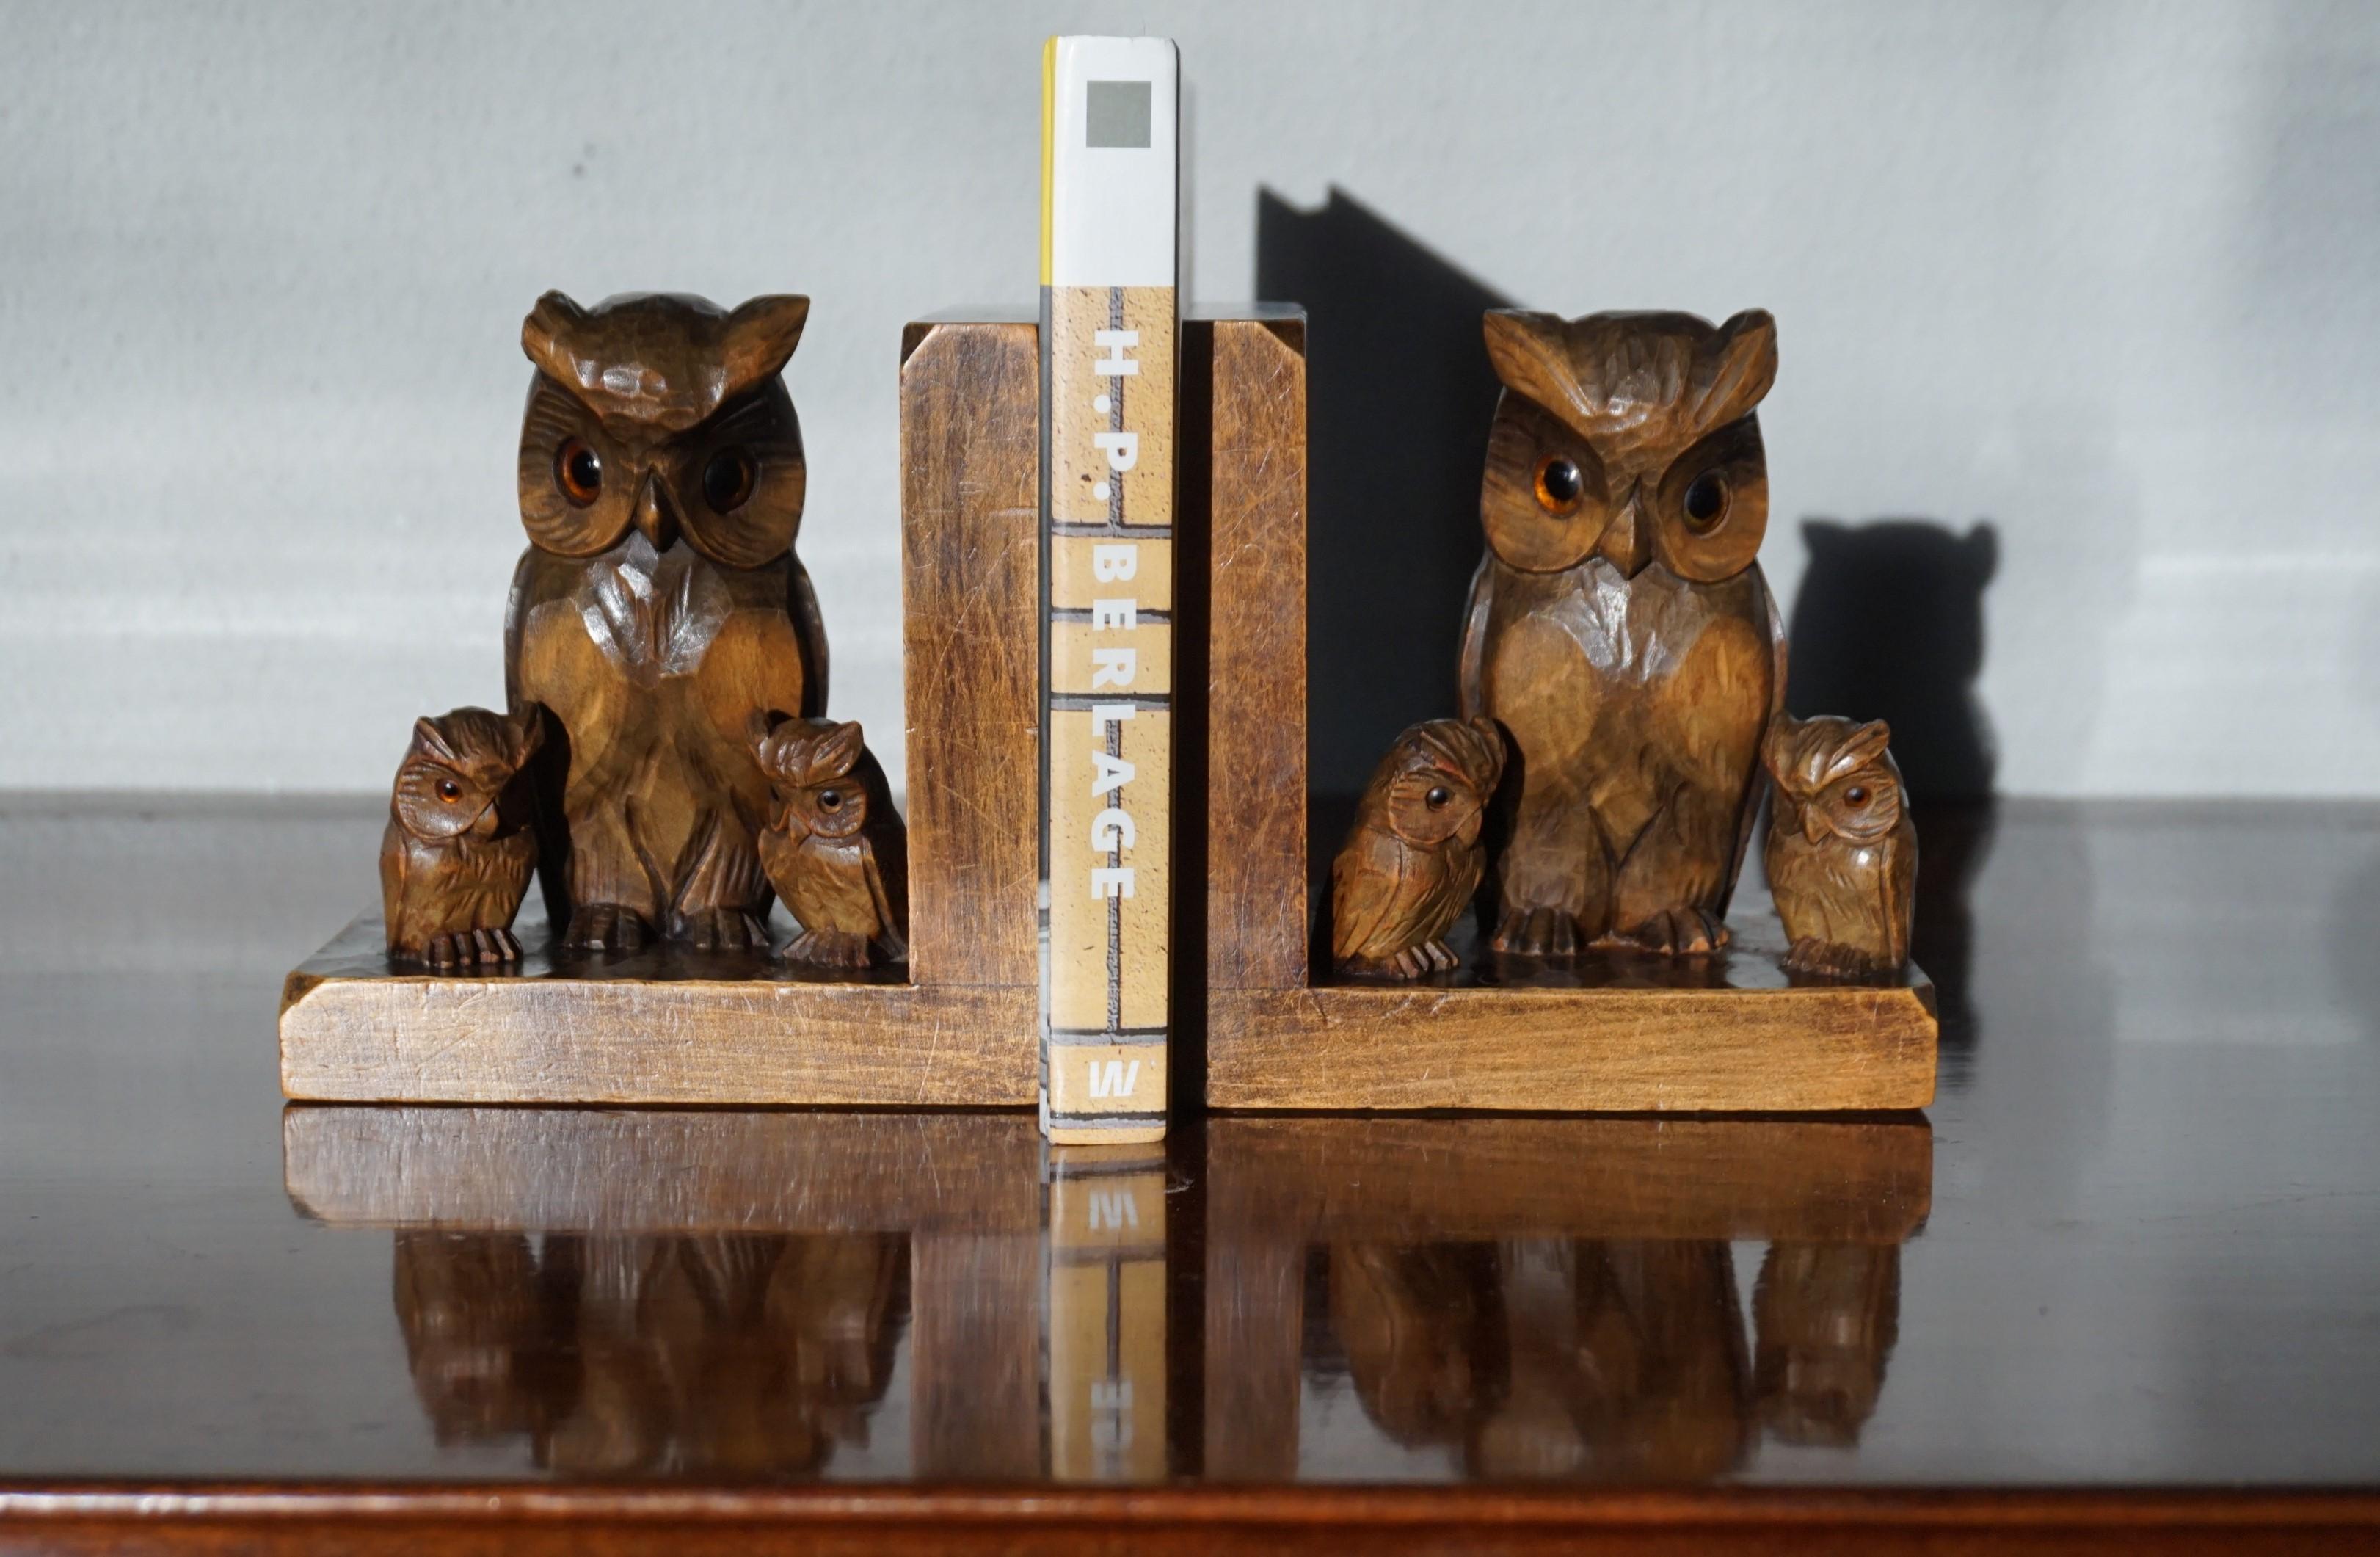 Early 20th Century Art Deco Era Bookends W. Hand Carved Family of Owl Sculptures 2